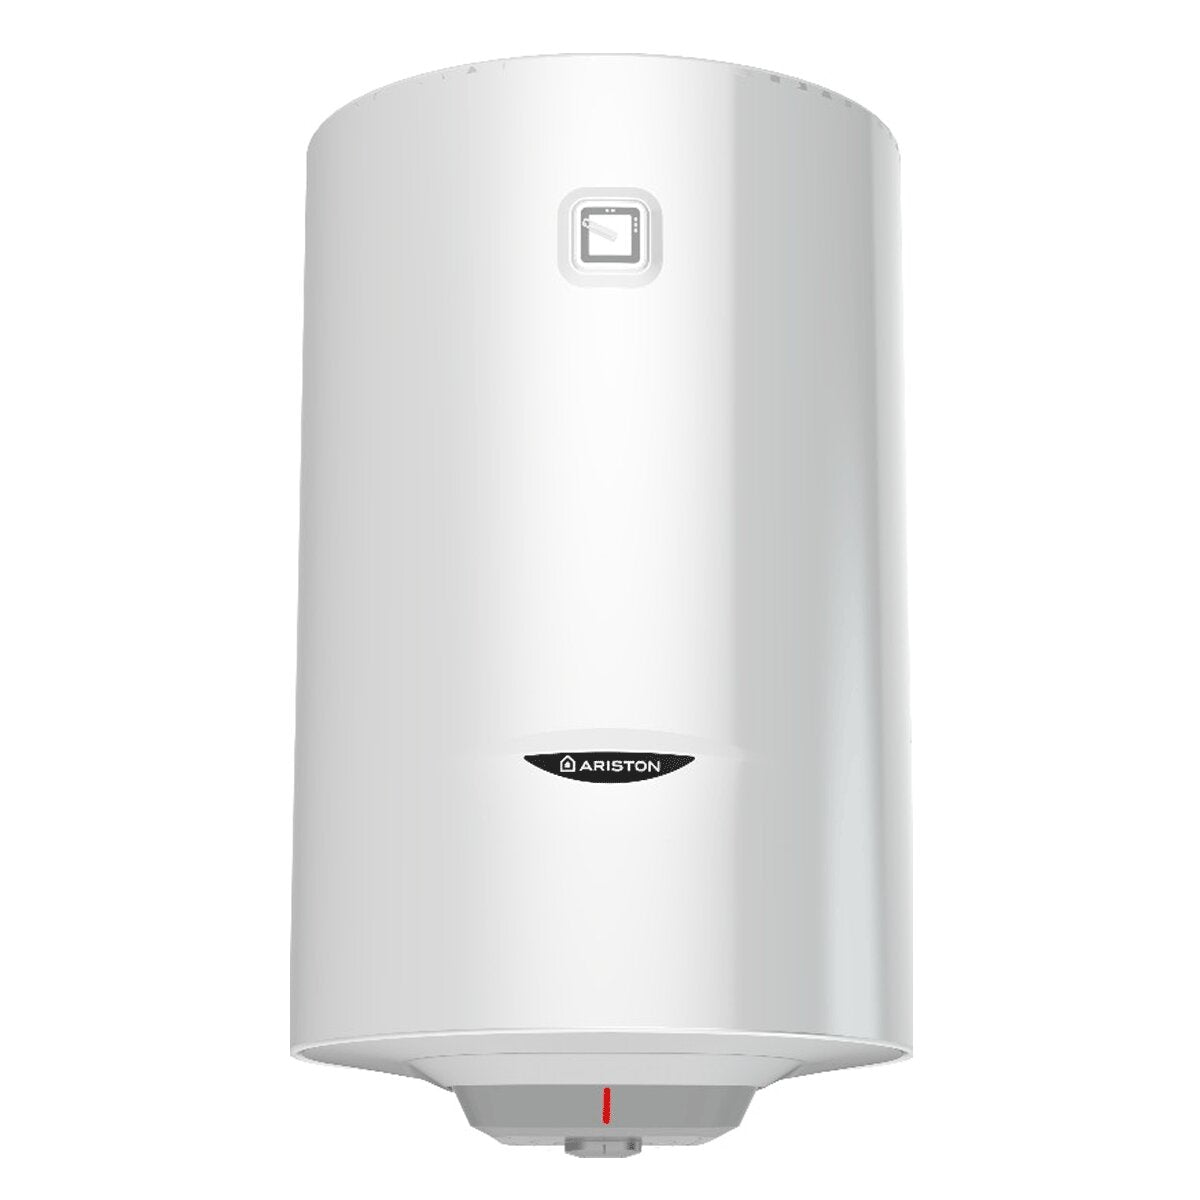 Ariston Pro1 R Thermo Vertical 80 Liter electric water heater with right coil